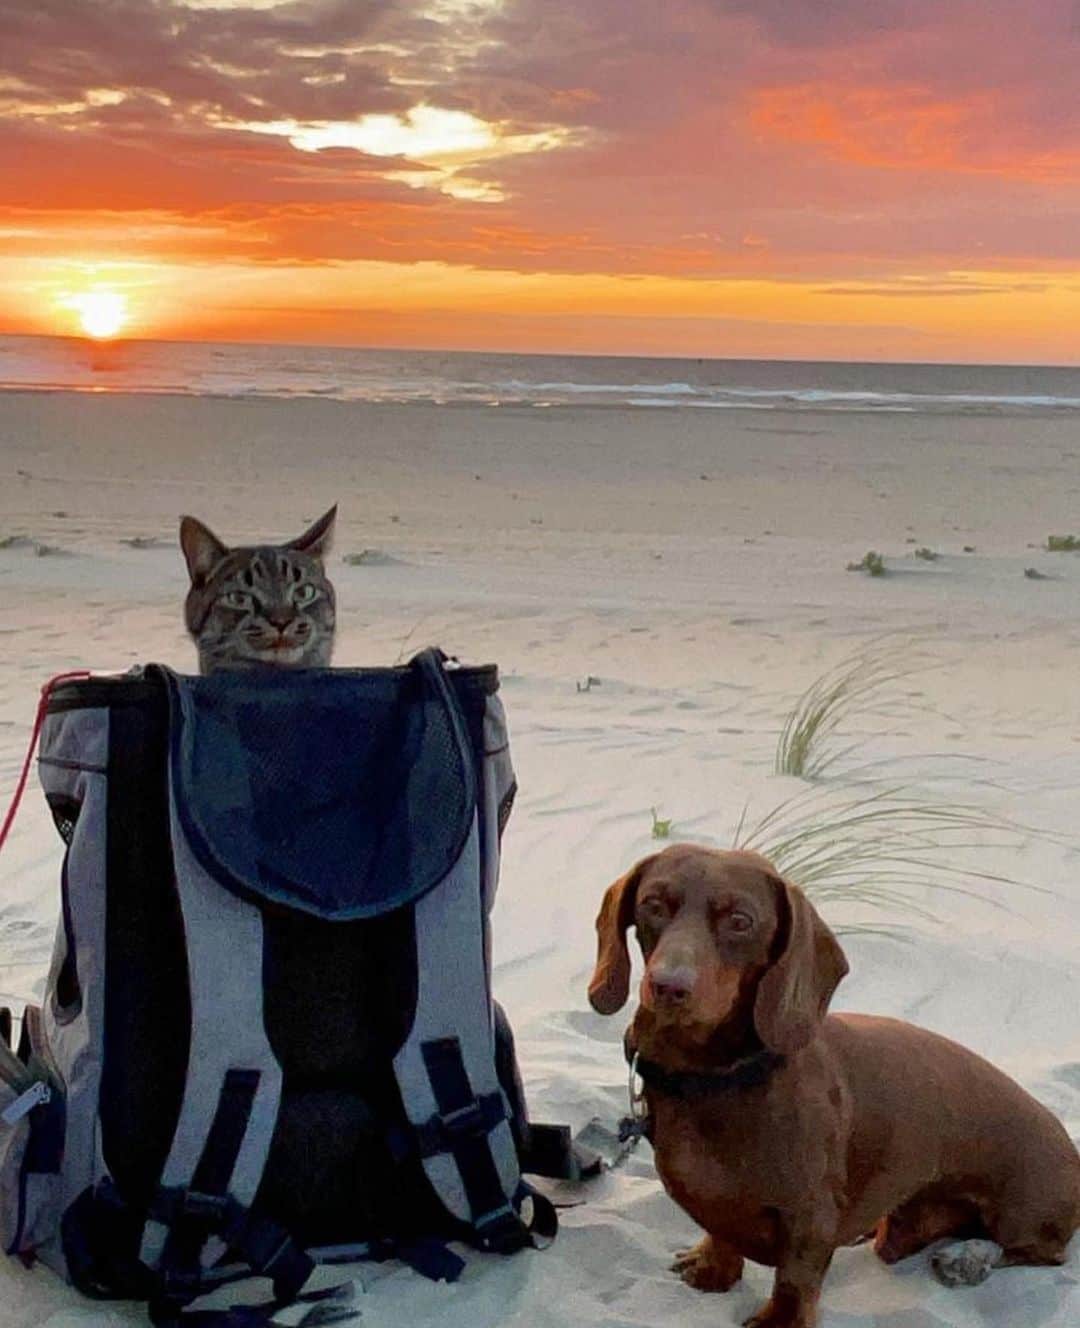 Bolt and Keelのインスタグラム：「Good friends make for good adventures🐾🌤️  @adventrapets ➡️ @oliverscatventures @lil.wim  —————————————————— Follow @adventrapets to meet cute, brave and inspiring adventure pets from all over the world! 🌲🐶🐱🌲  • TAG US IN YOUR POSTS to get your little adventurer featured! #adventrapets ——————————————————」